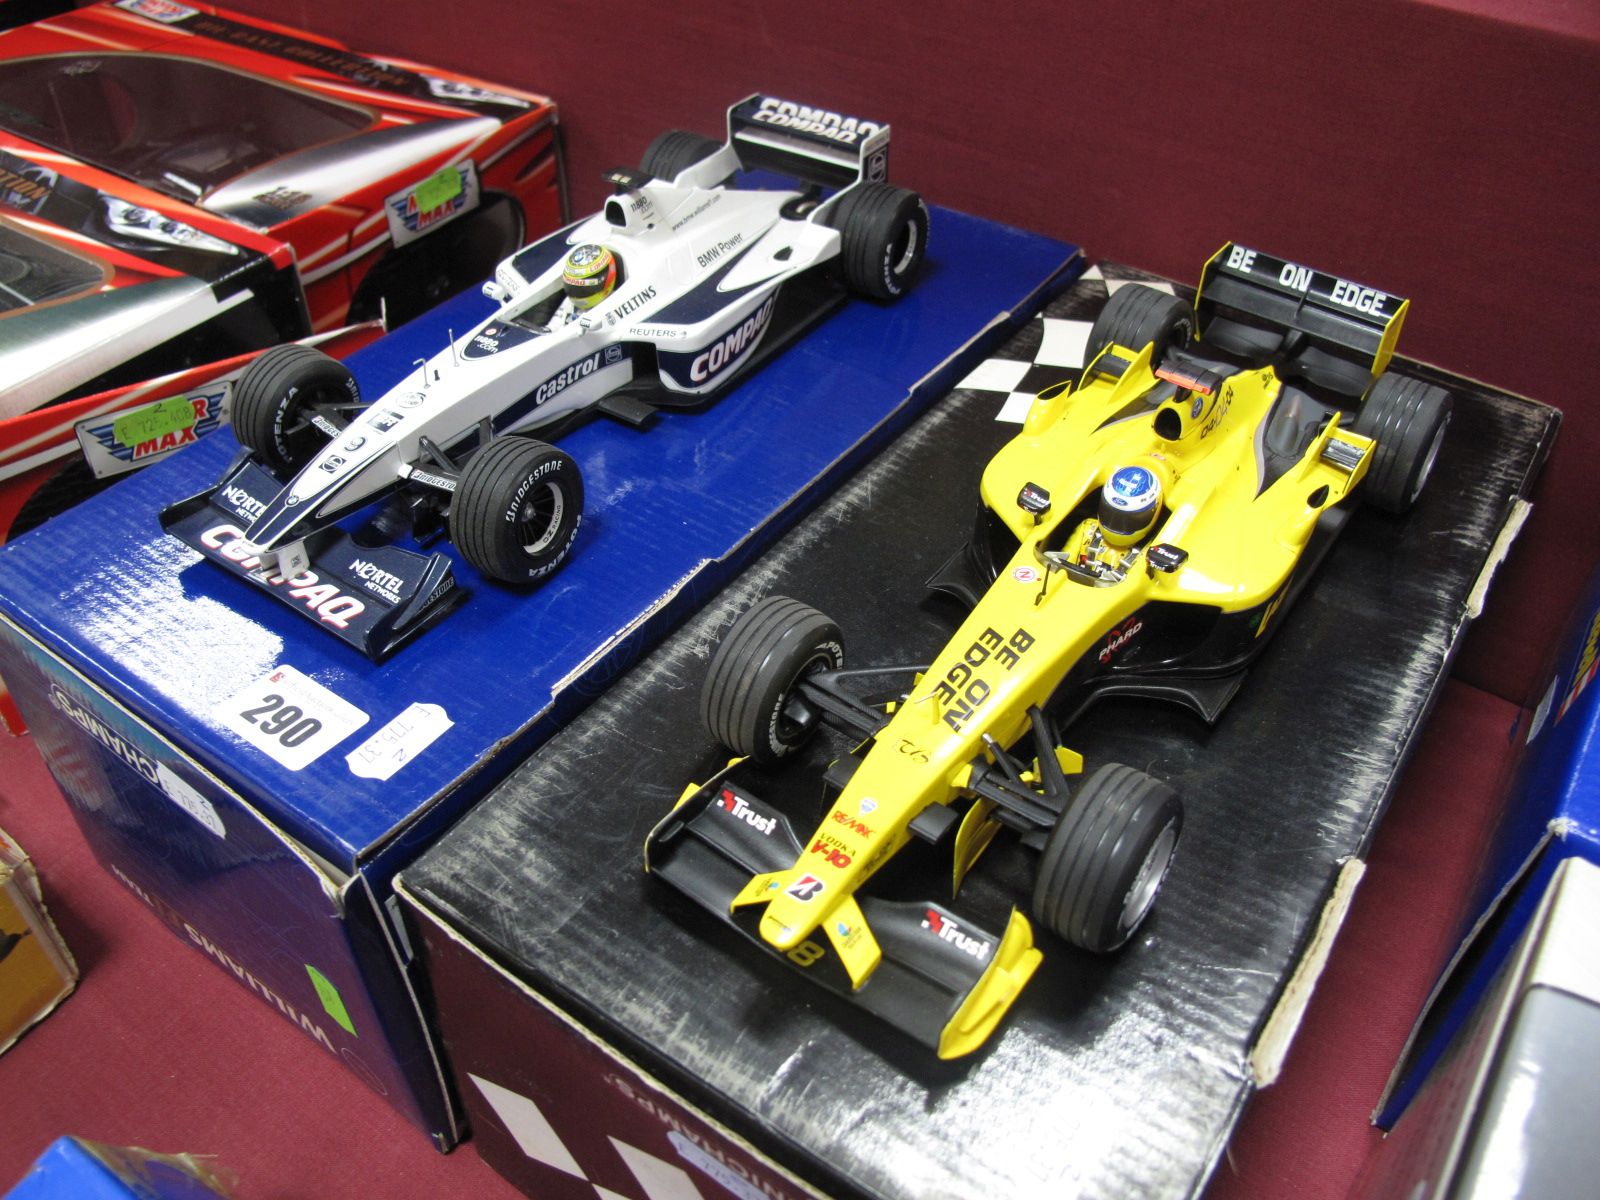 Two Boxed Minichamps 1:18th Scale Die Cast Formula One Cars, # 057494 Jordan Ford E314, G. Pantano